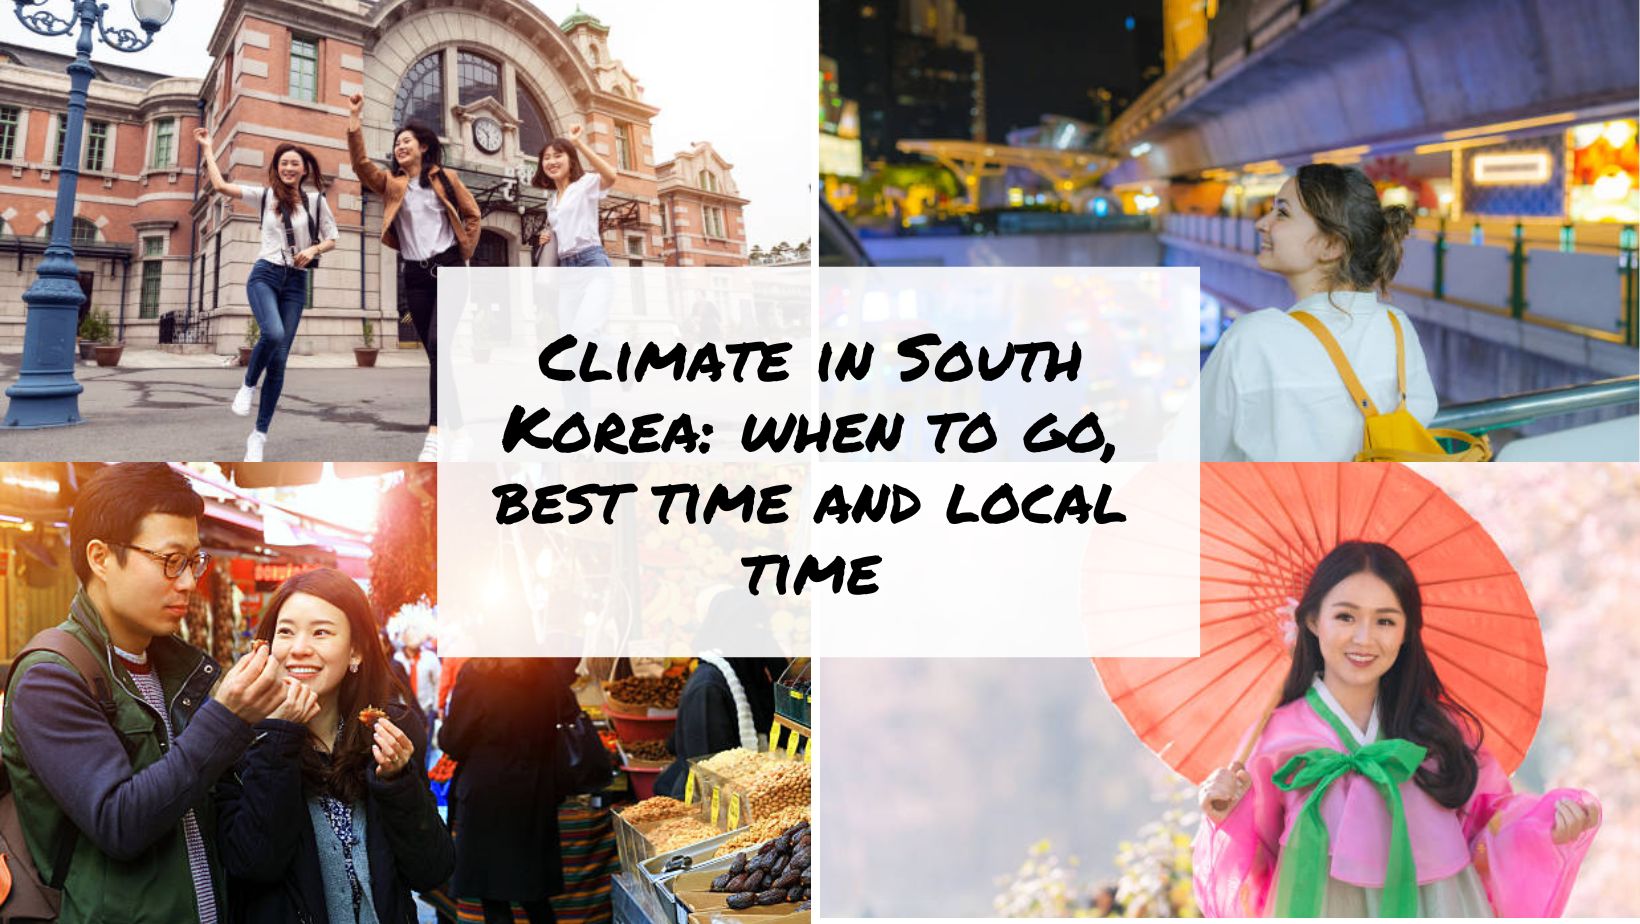 Climate in South Korea when to go, best time and local time